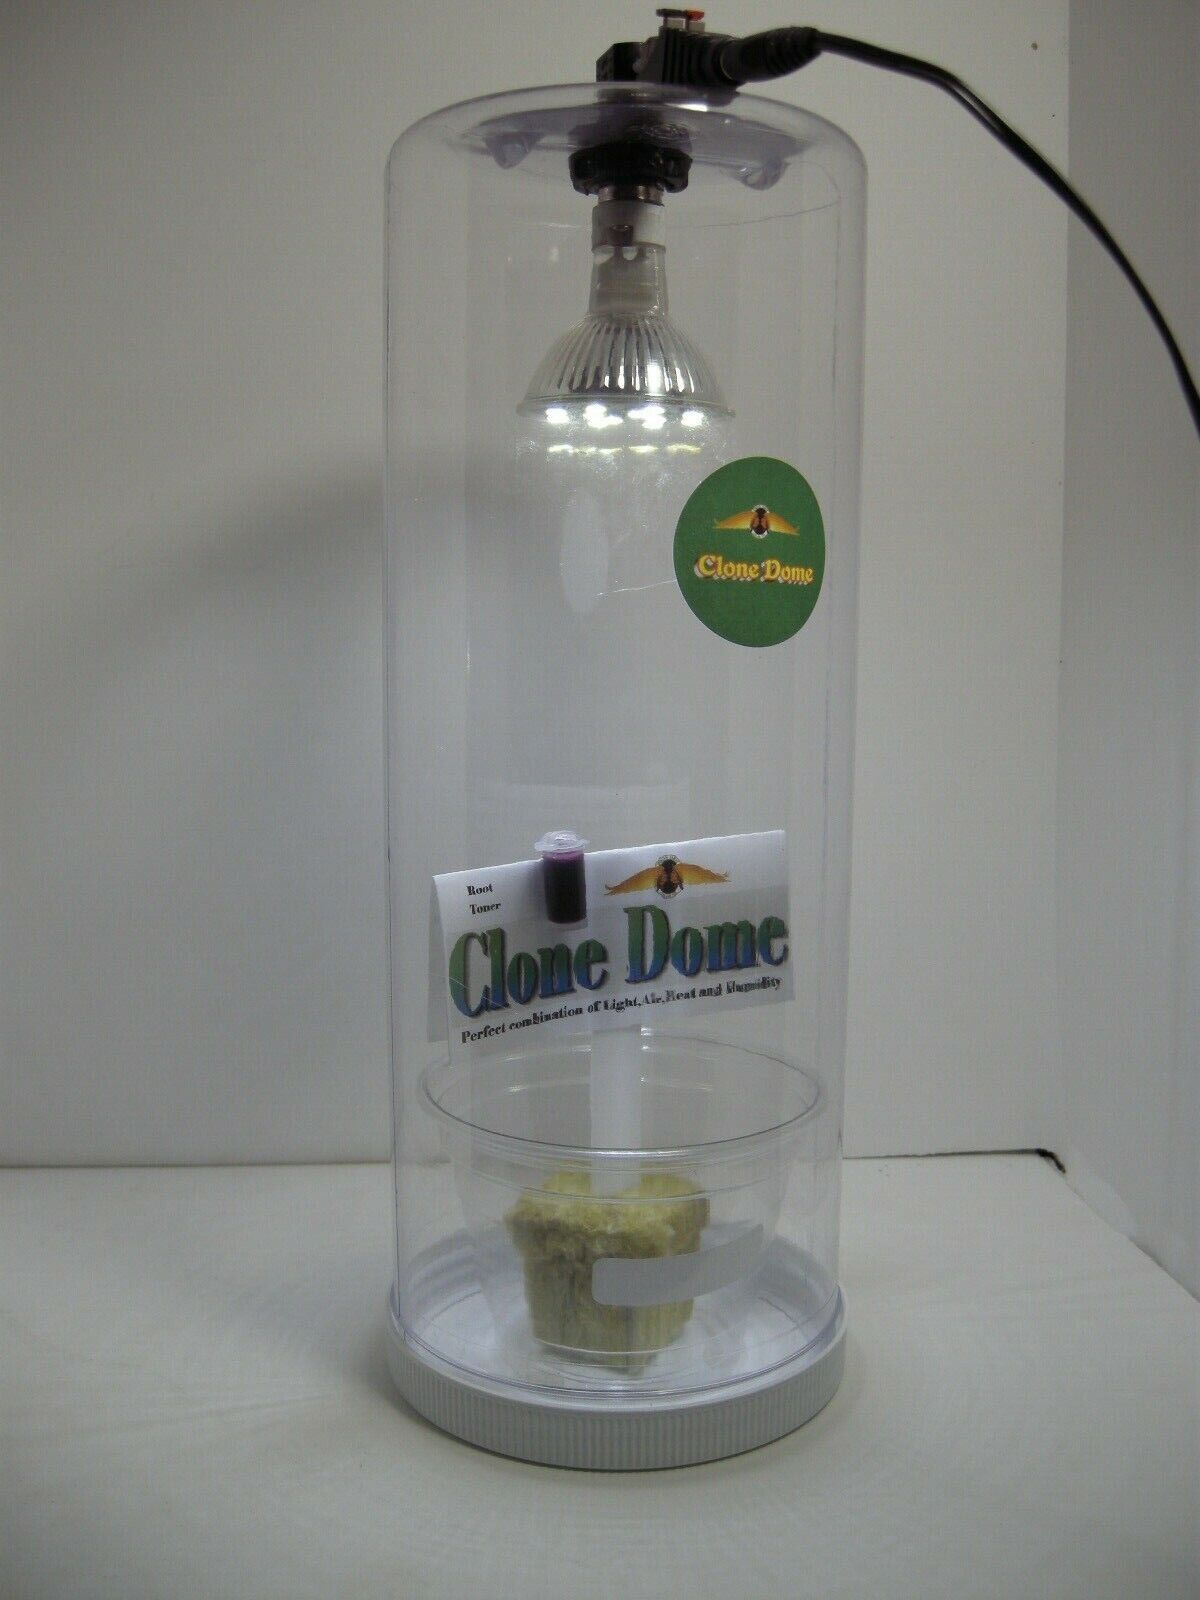 "CLONE DOME" For Cloning Pot Plants,Perfect Light,Heat,Air,Moisture,Led Light Unbranded